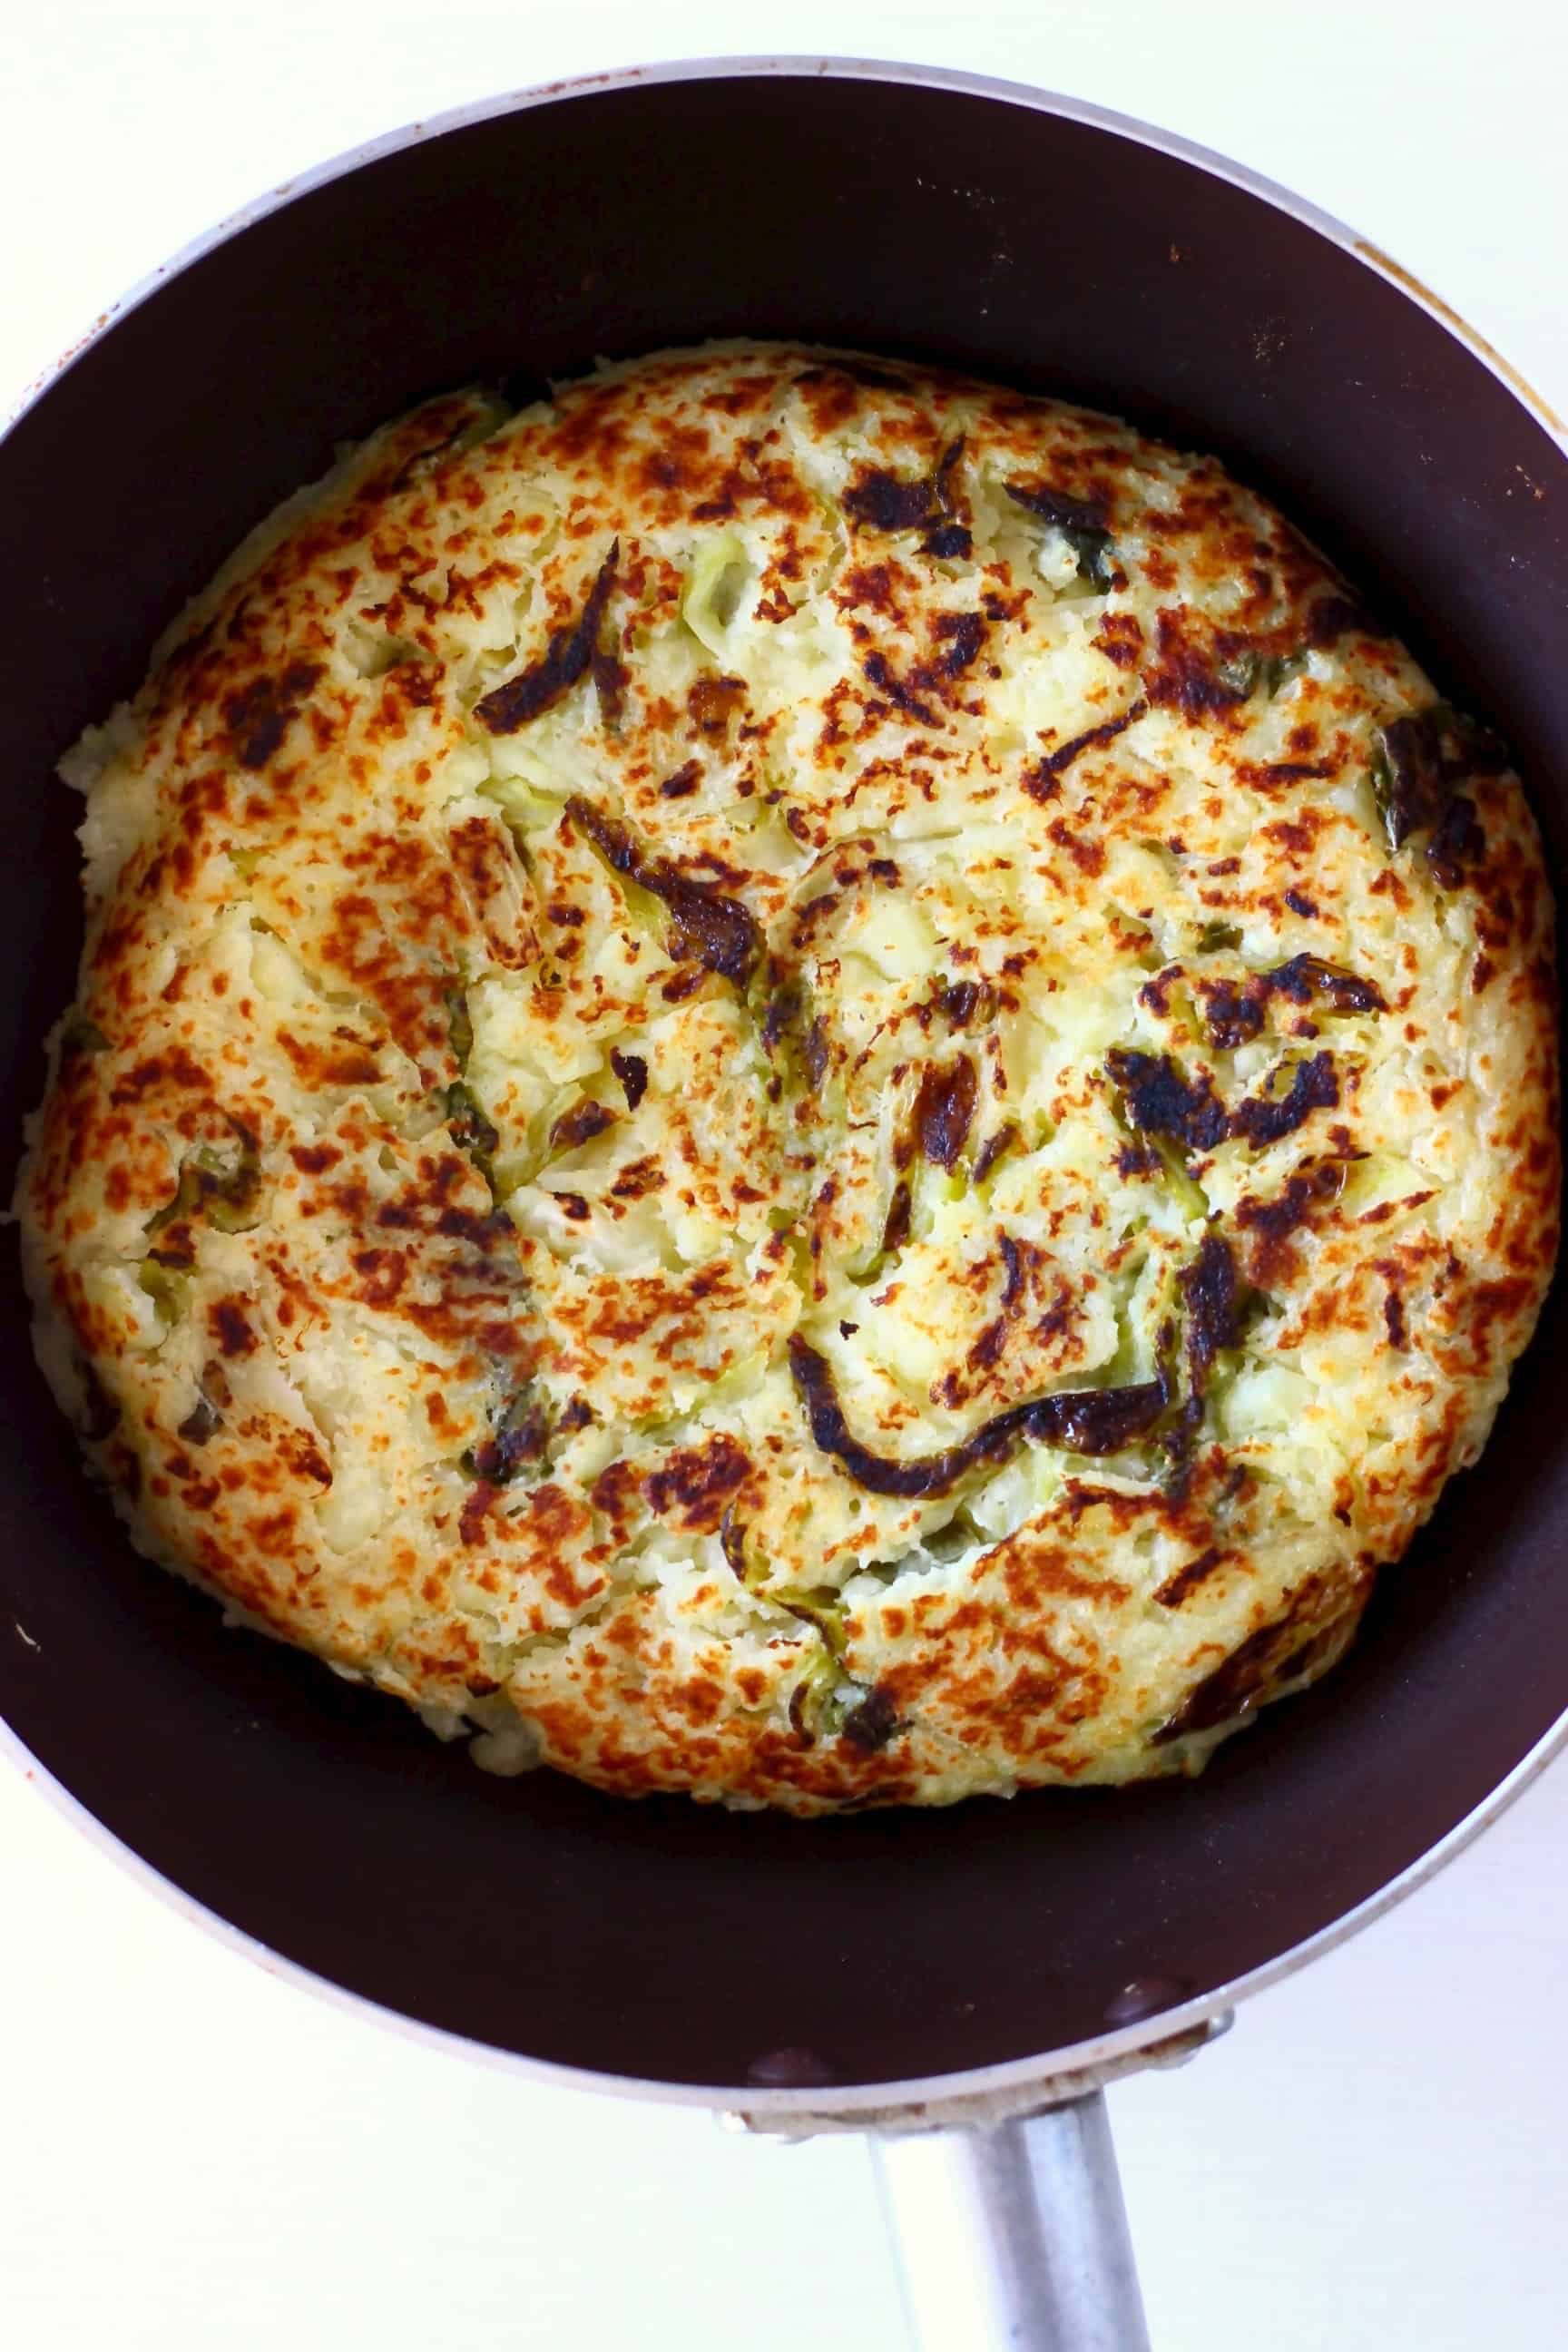 A circular, golden brown bubble and squeak cake in a dark frying pan against a white background